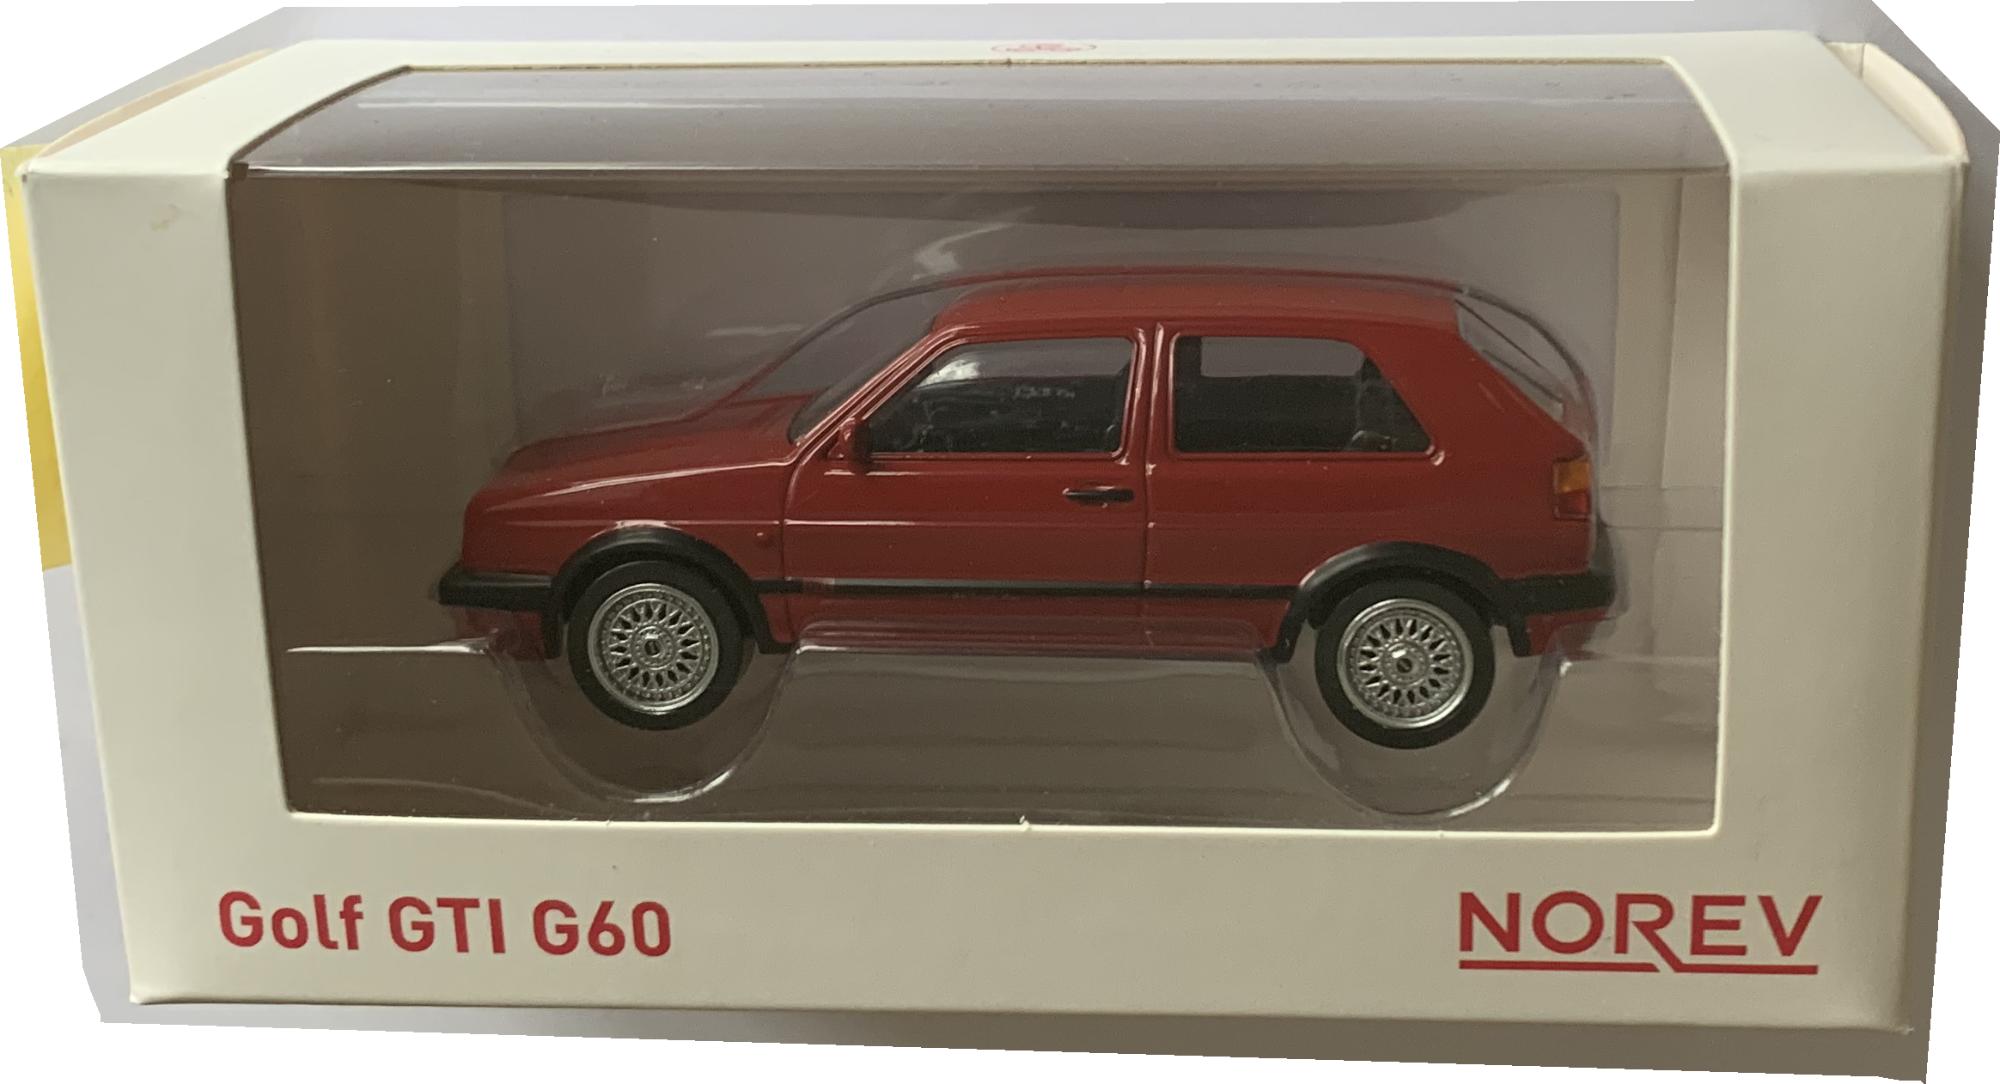 VW Golf GTI G60 1990 in red 1:43 scale model from Norev, NOR840062